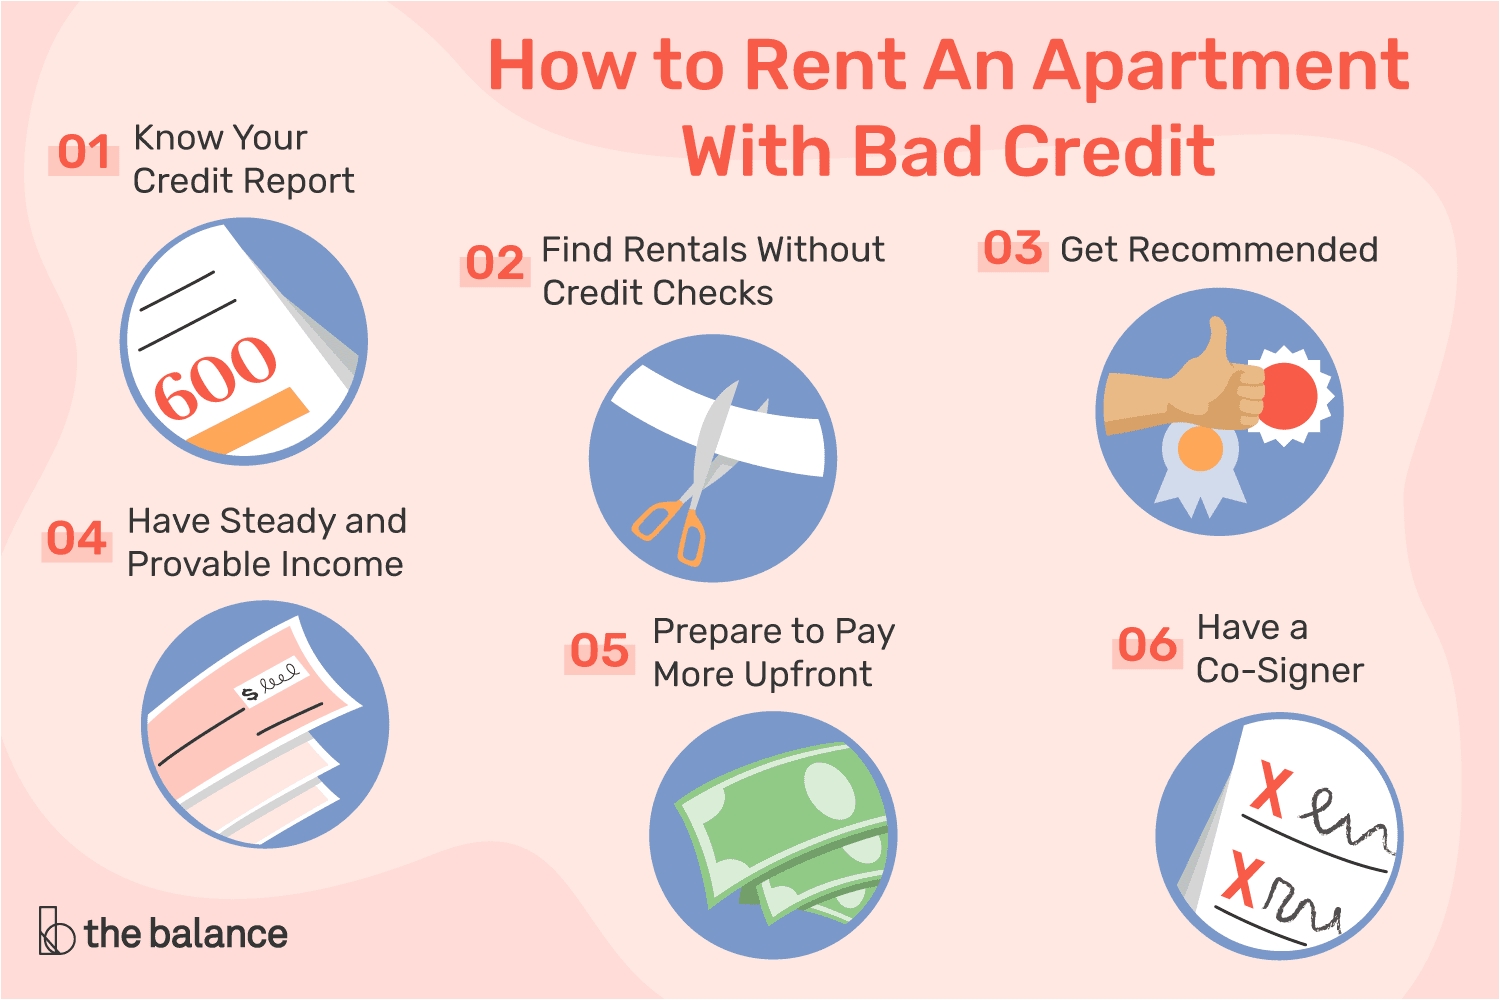 how to rent an apartment with bad credit 960969 v3 5b64bafa46e0fb0025430a5e